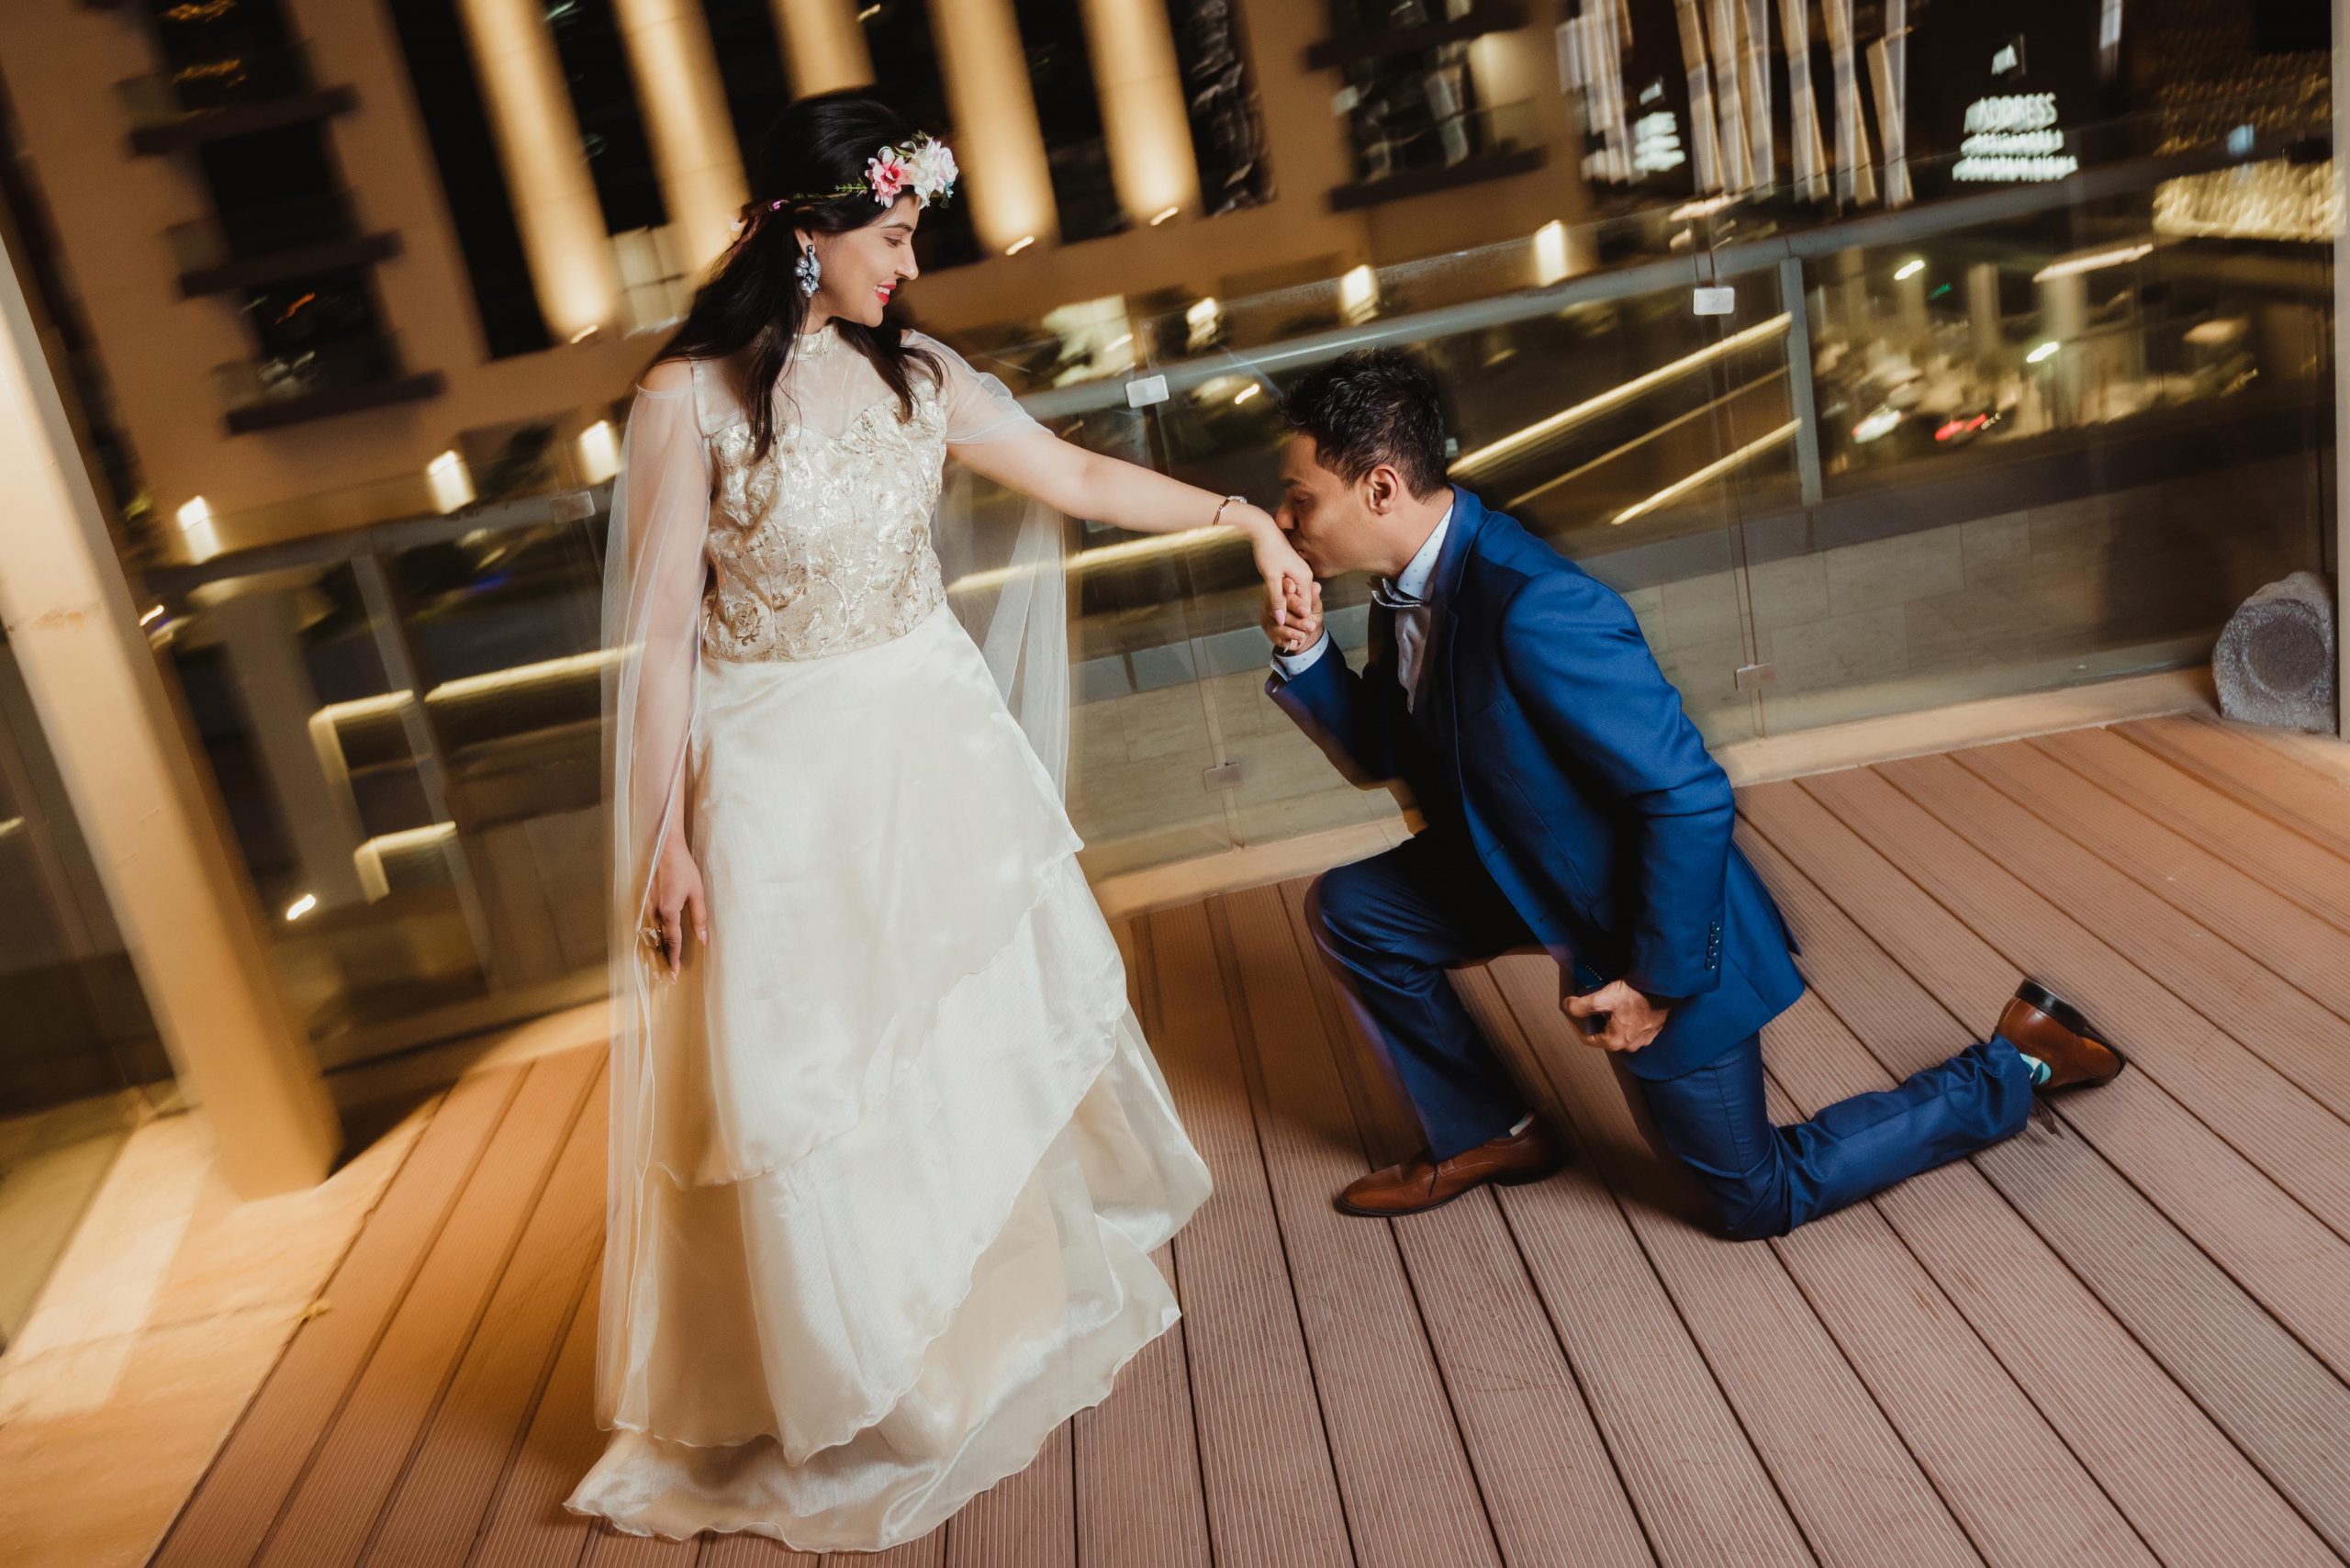 Capturing a Moment for a Lifetime | Mallikphotography (Wedding)